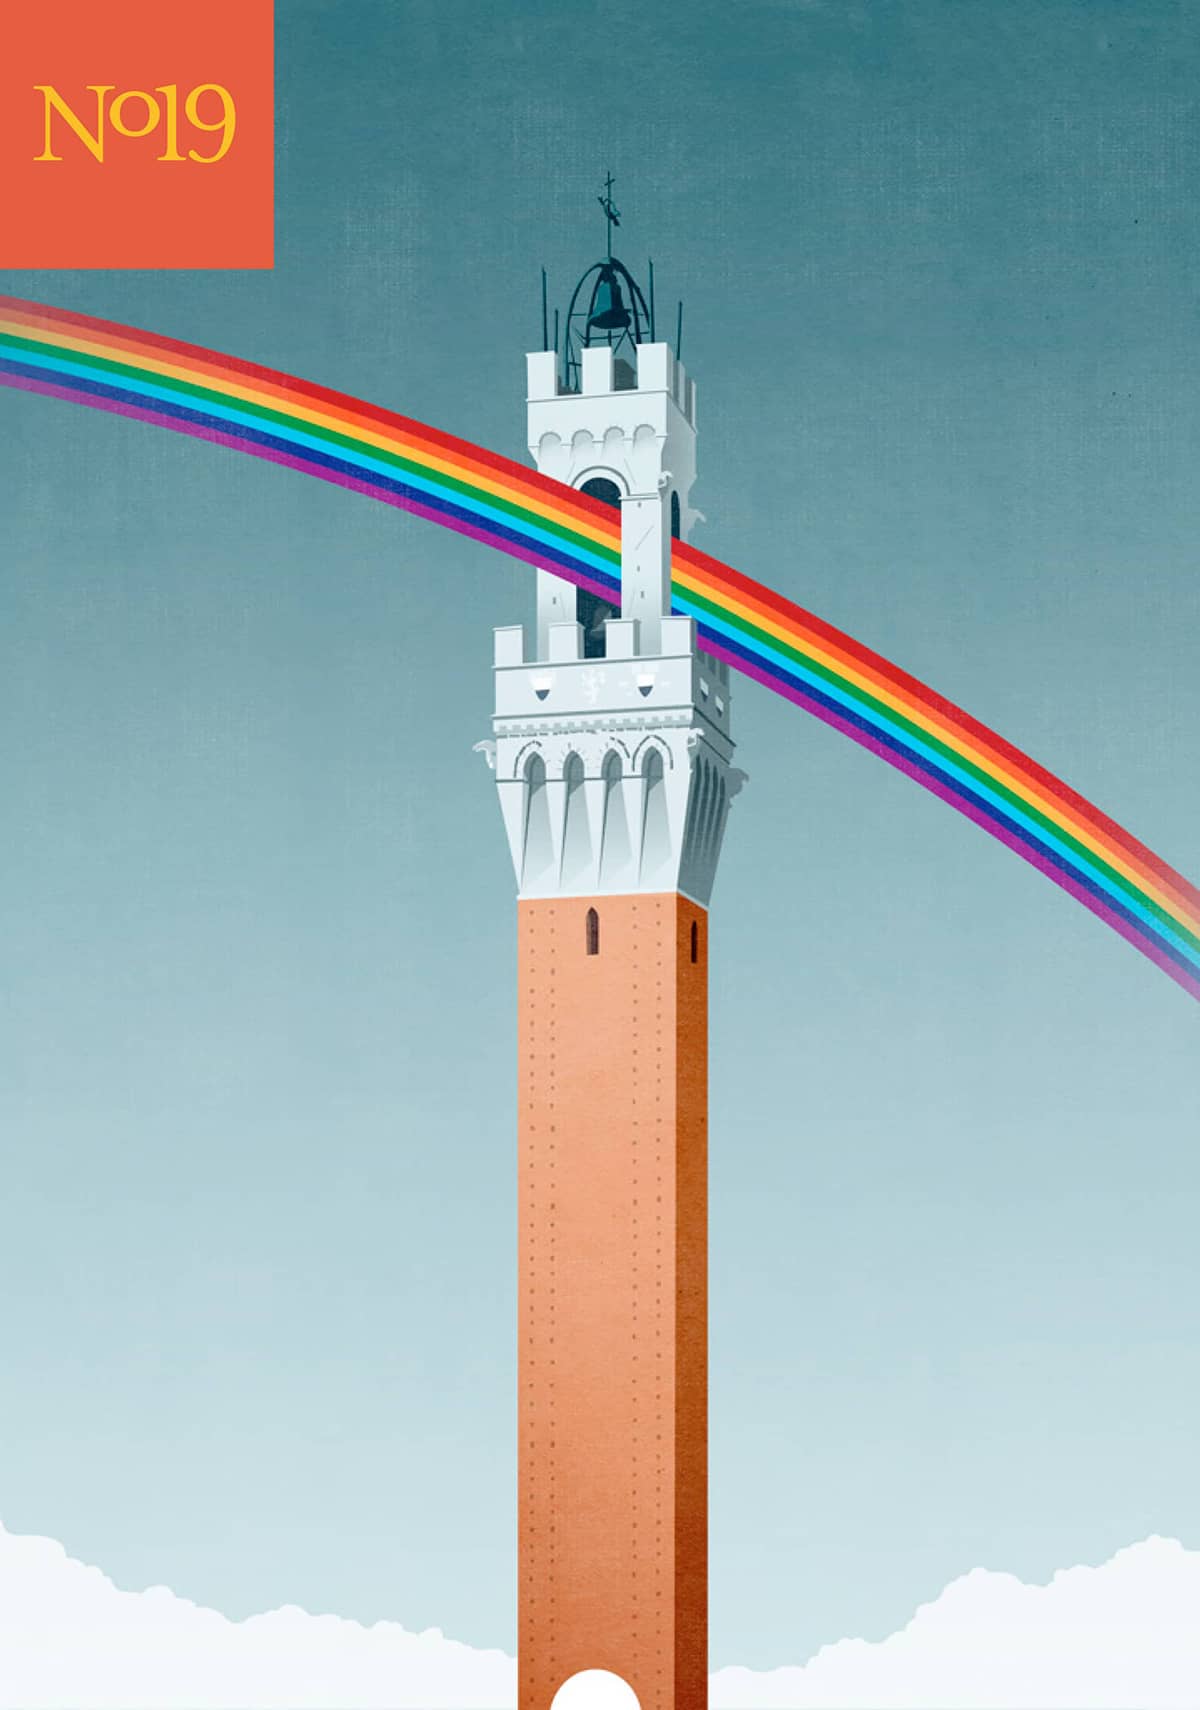 3x3 Annual No.19 Cover image. A tower with a rainbow going through the window